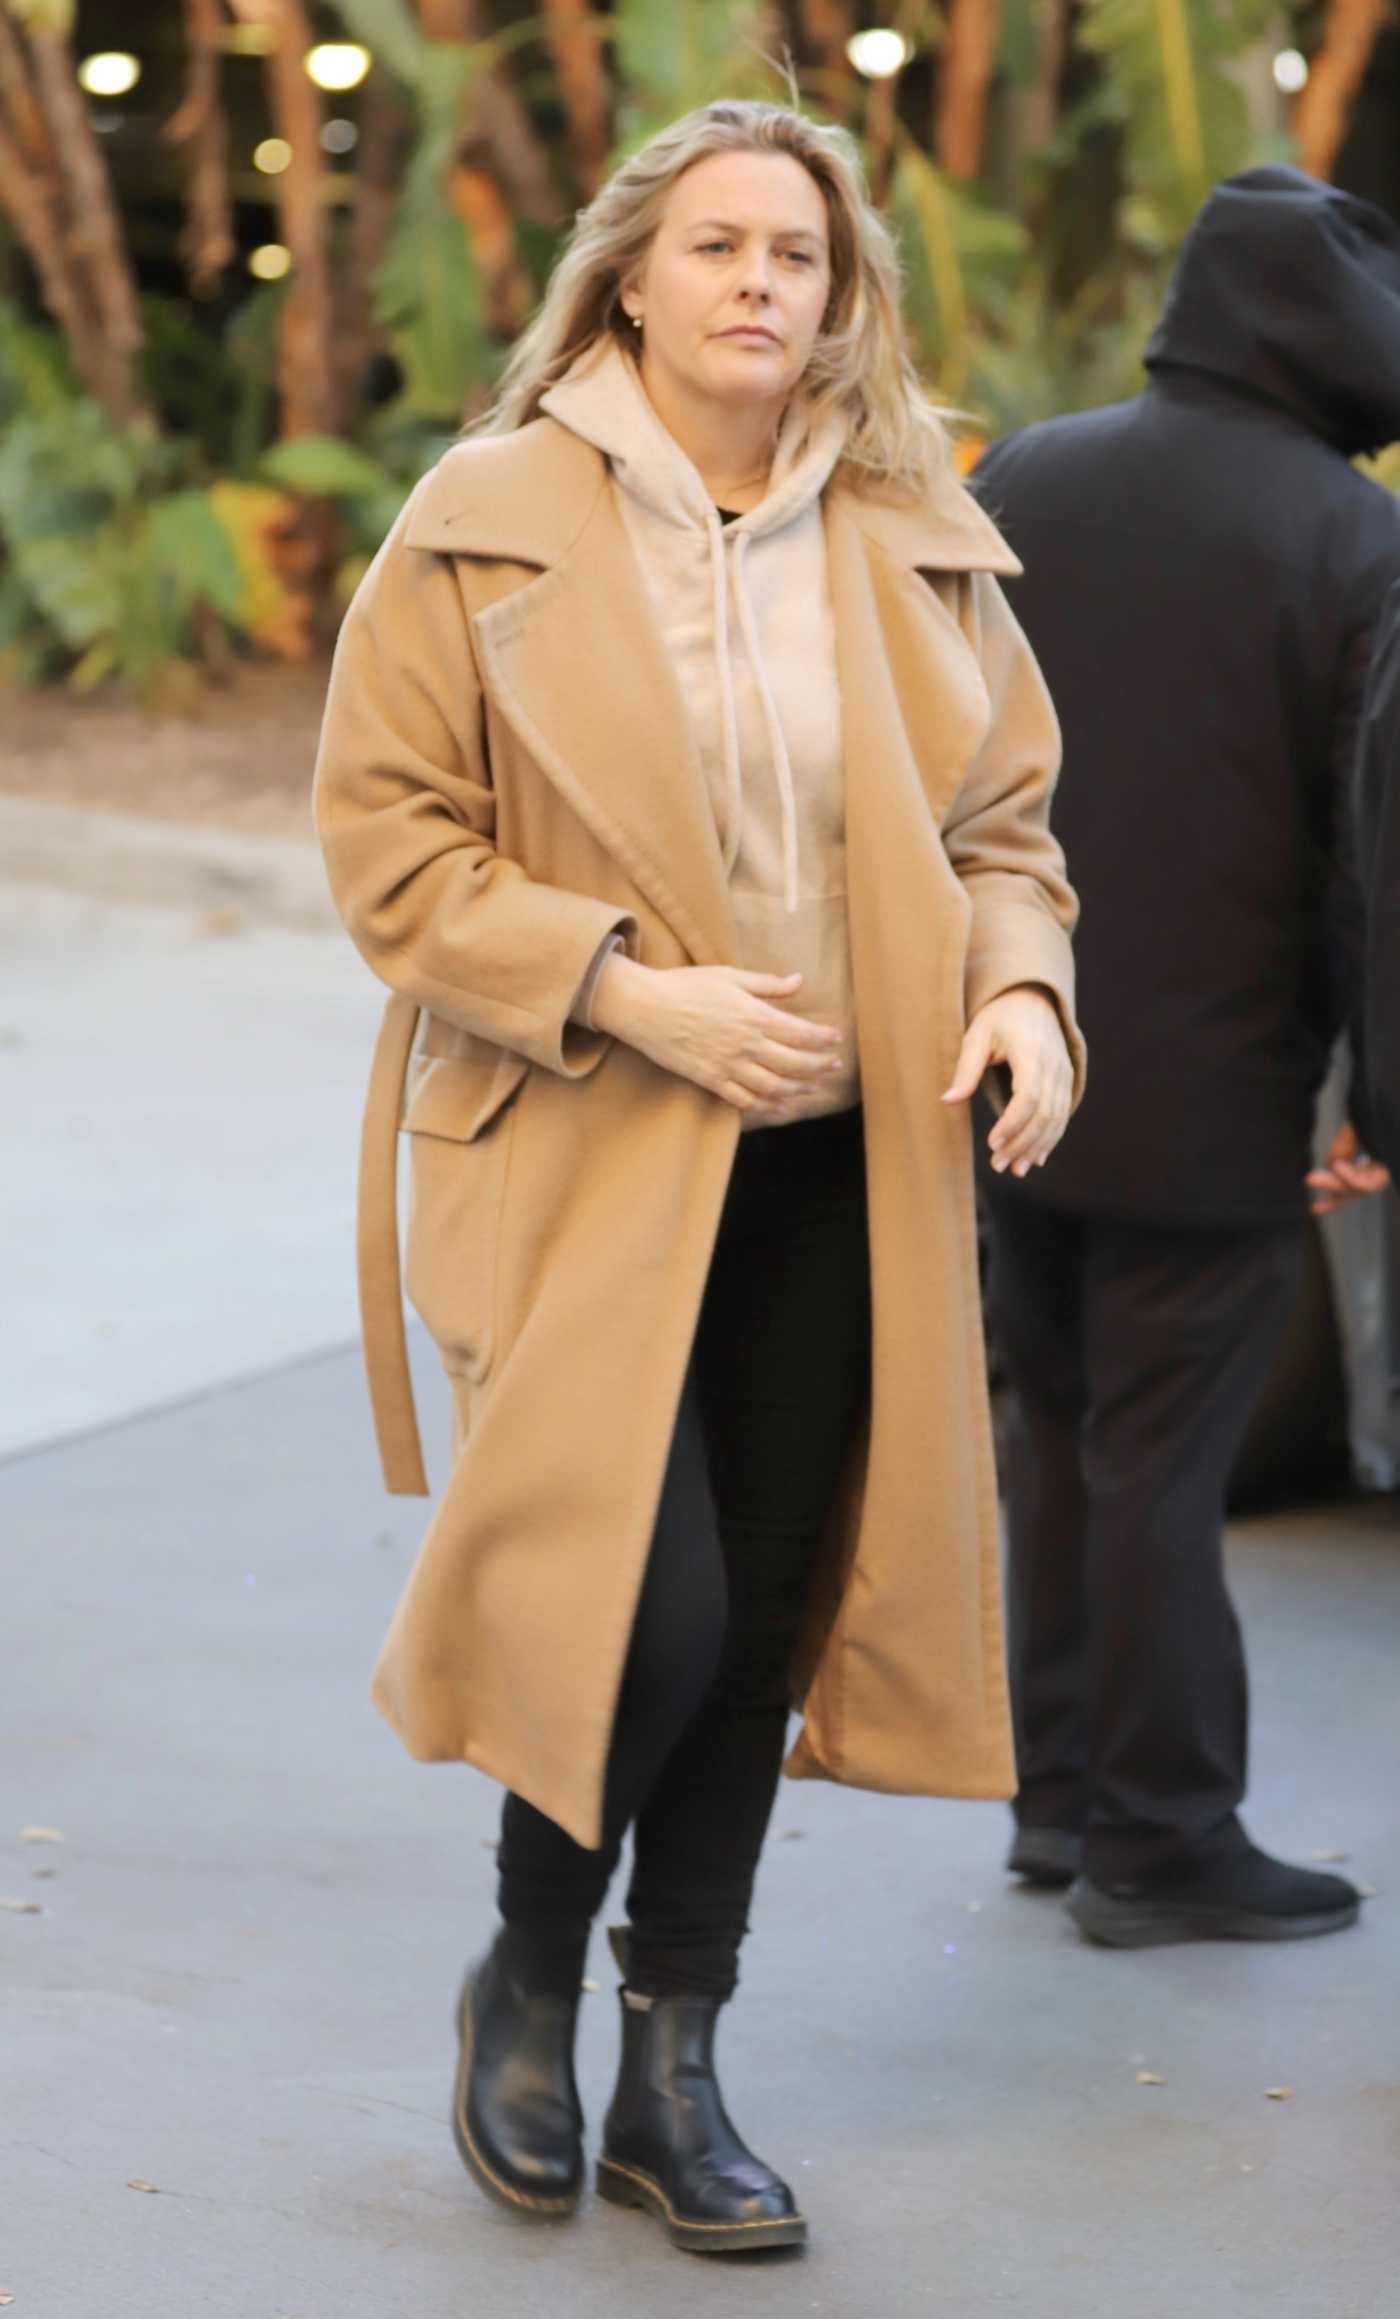 Alicia Silverstone in a Caramel Coloured Coat Arrives at the Lakers Game at the Crypto.com Arena in Los Angeles 03/24/2023